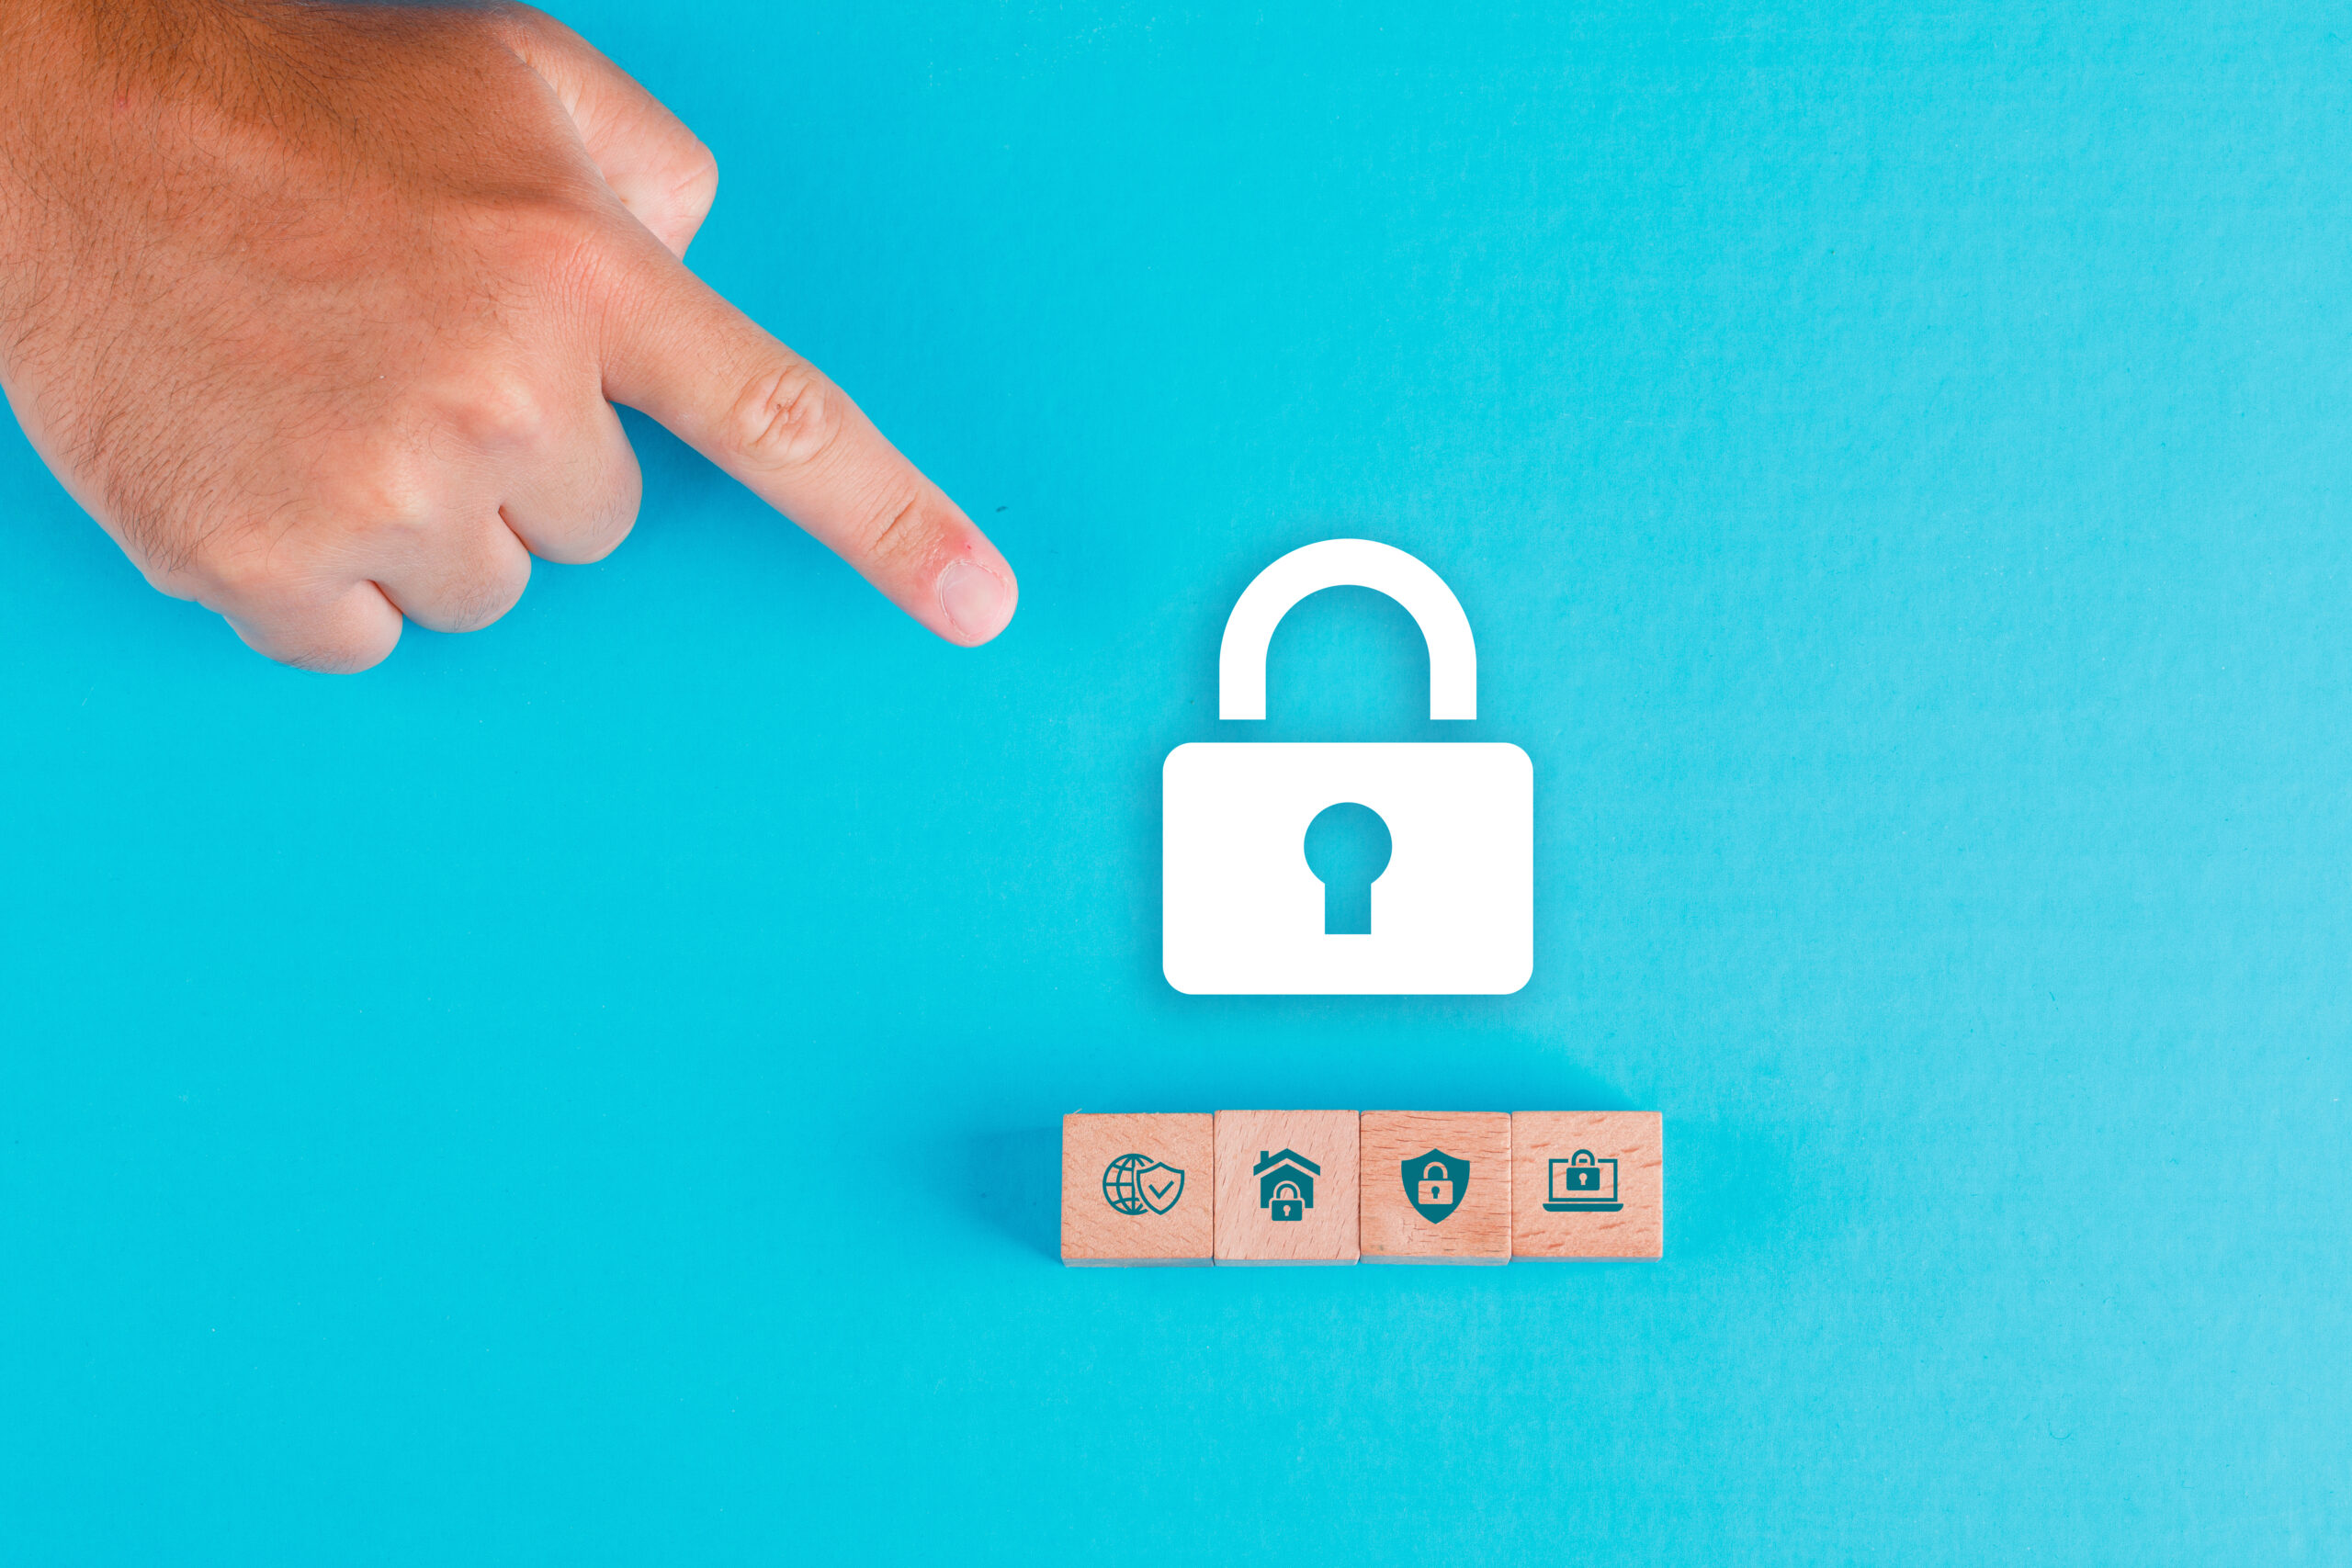 Security concept with wooden blocks, paper lock icon on blue background flat lay. man hand pointing. horizontal image